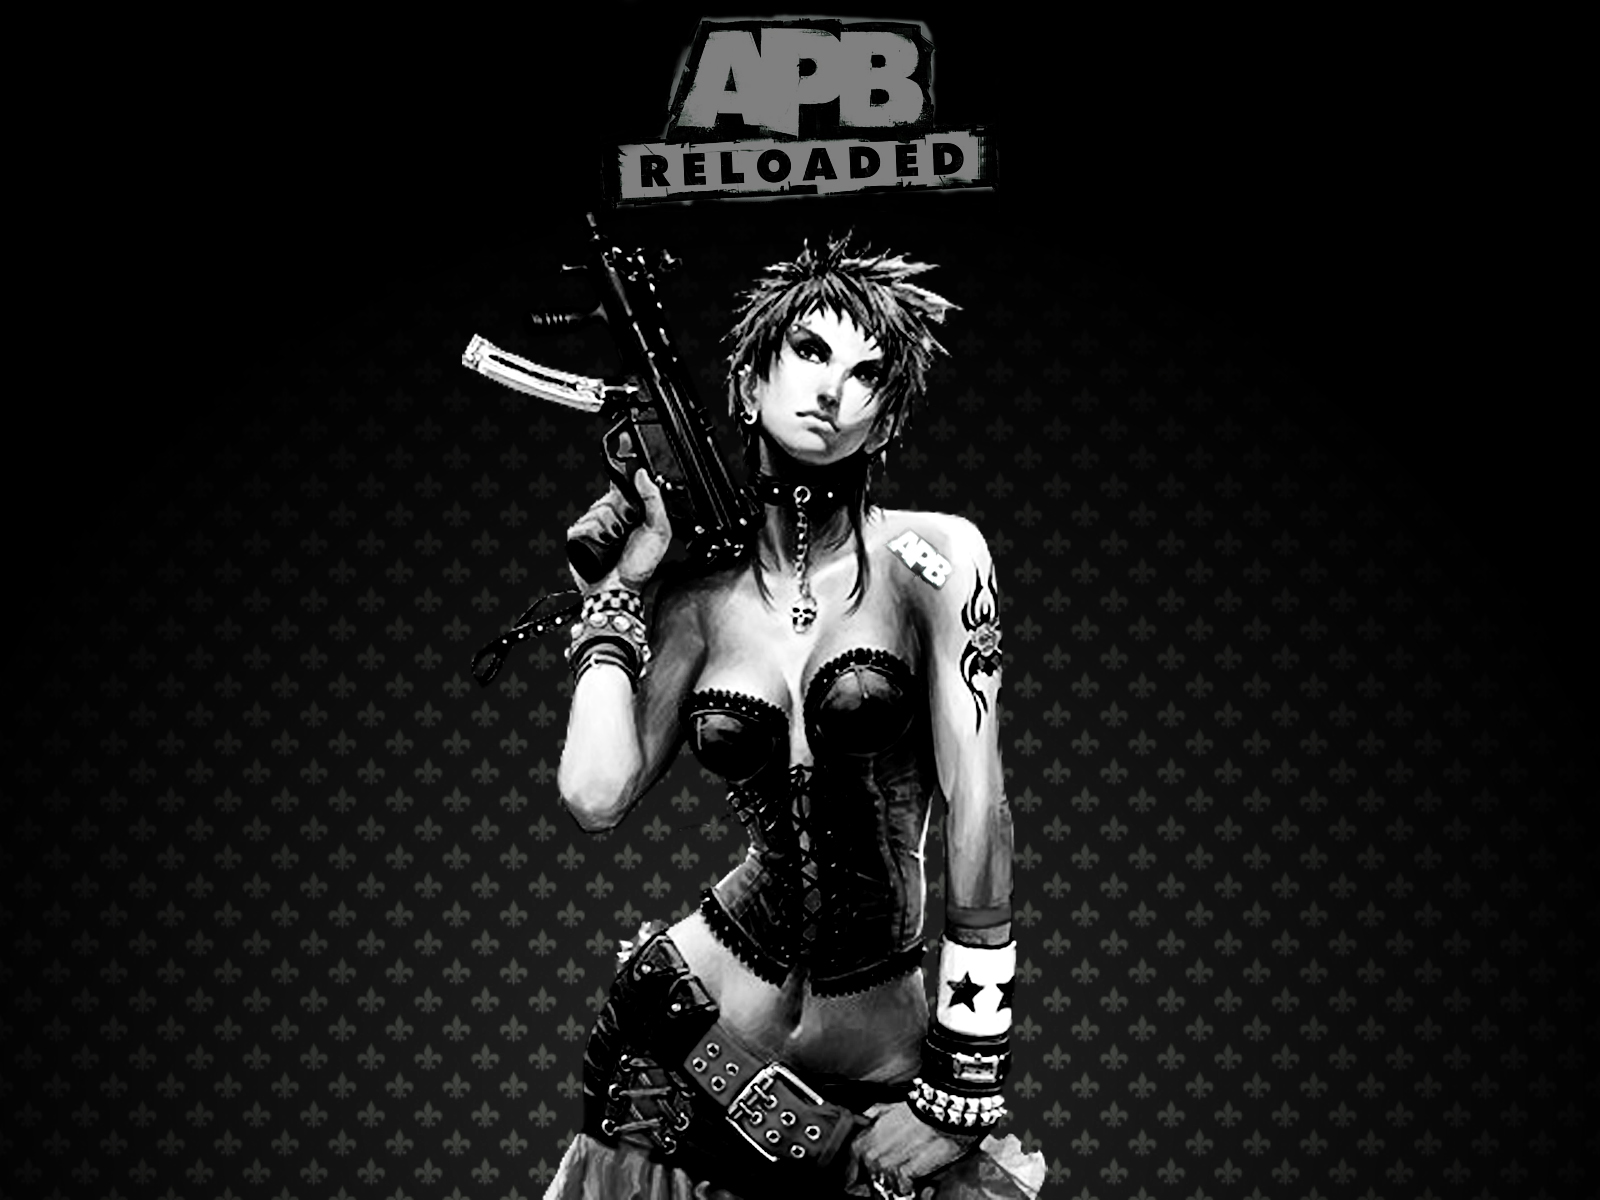 APB(All Points Bulletin) Reloaded